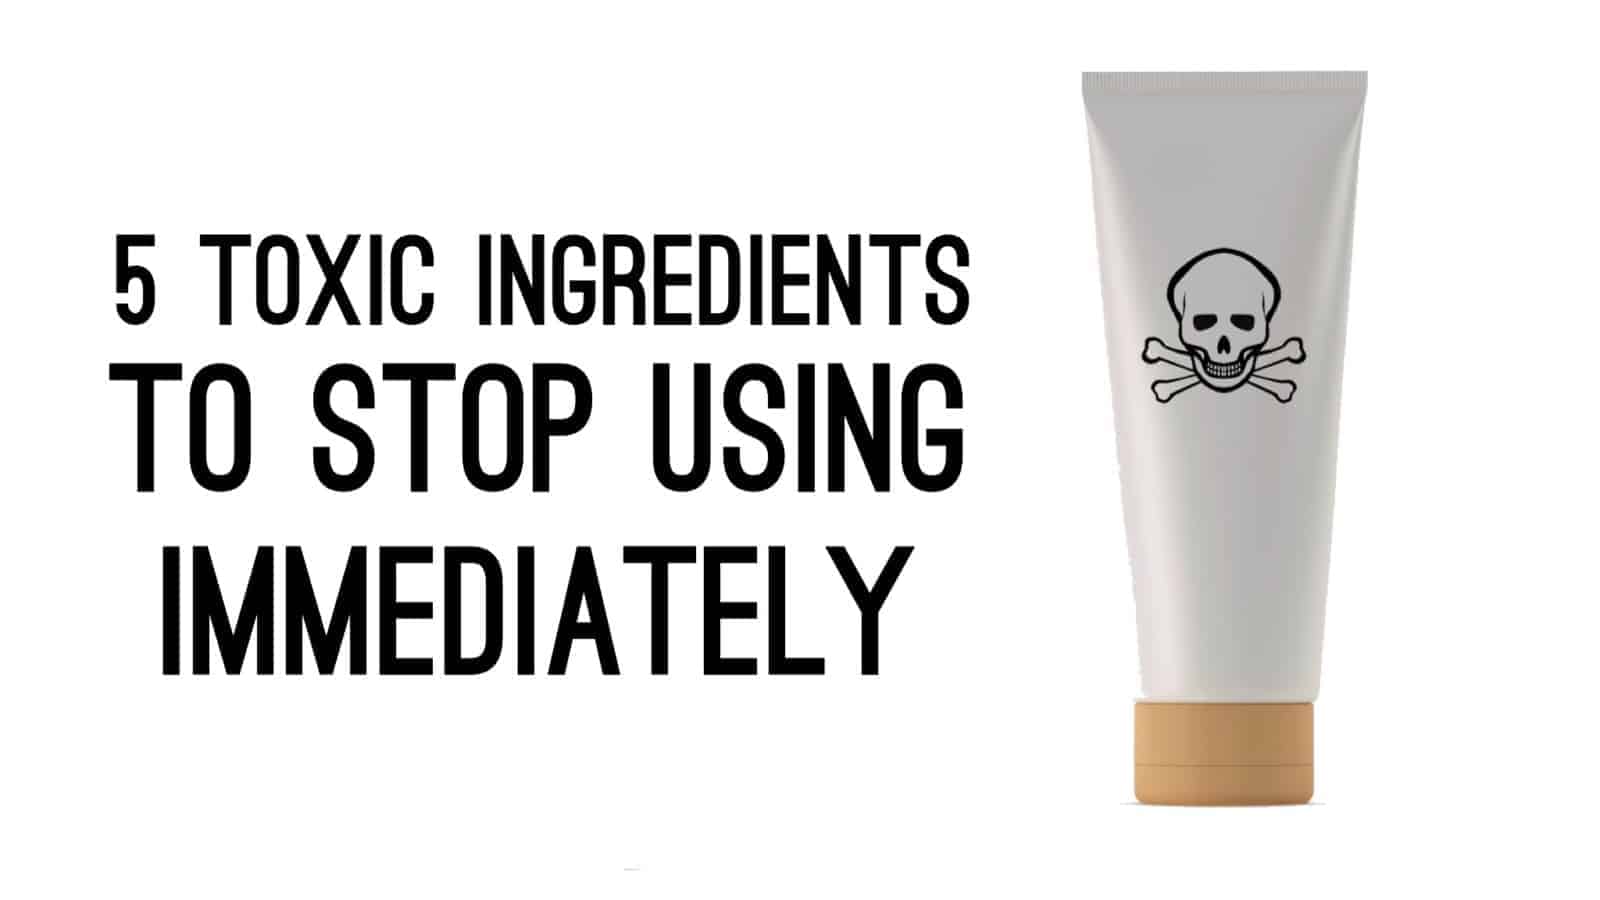 5 Toxic Ingredients To Stop Using Immediately